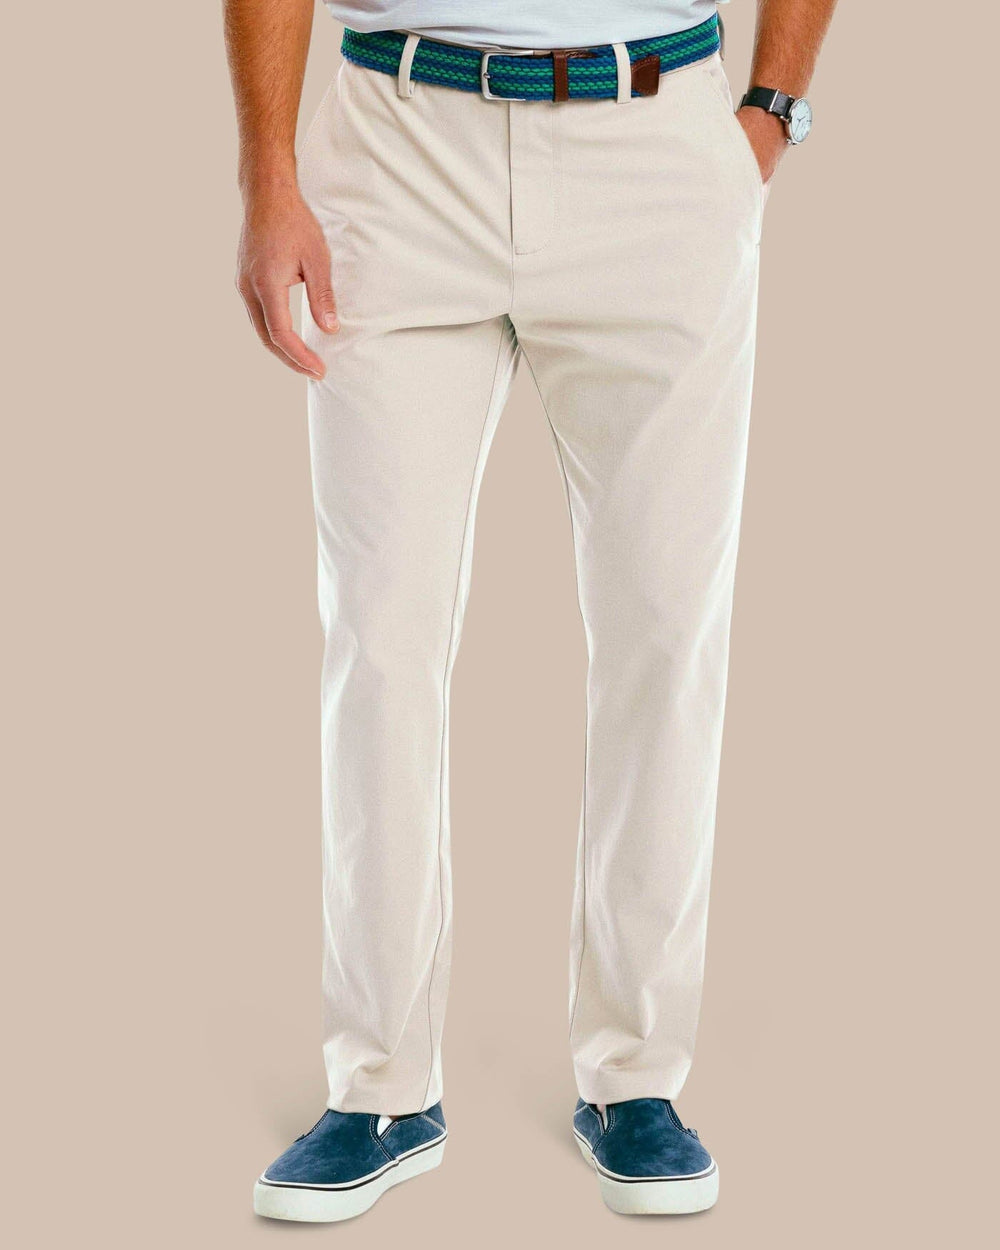 The front view of the Men's Jack Performance Pant by Southern Tide - Putty